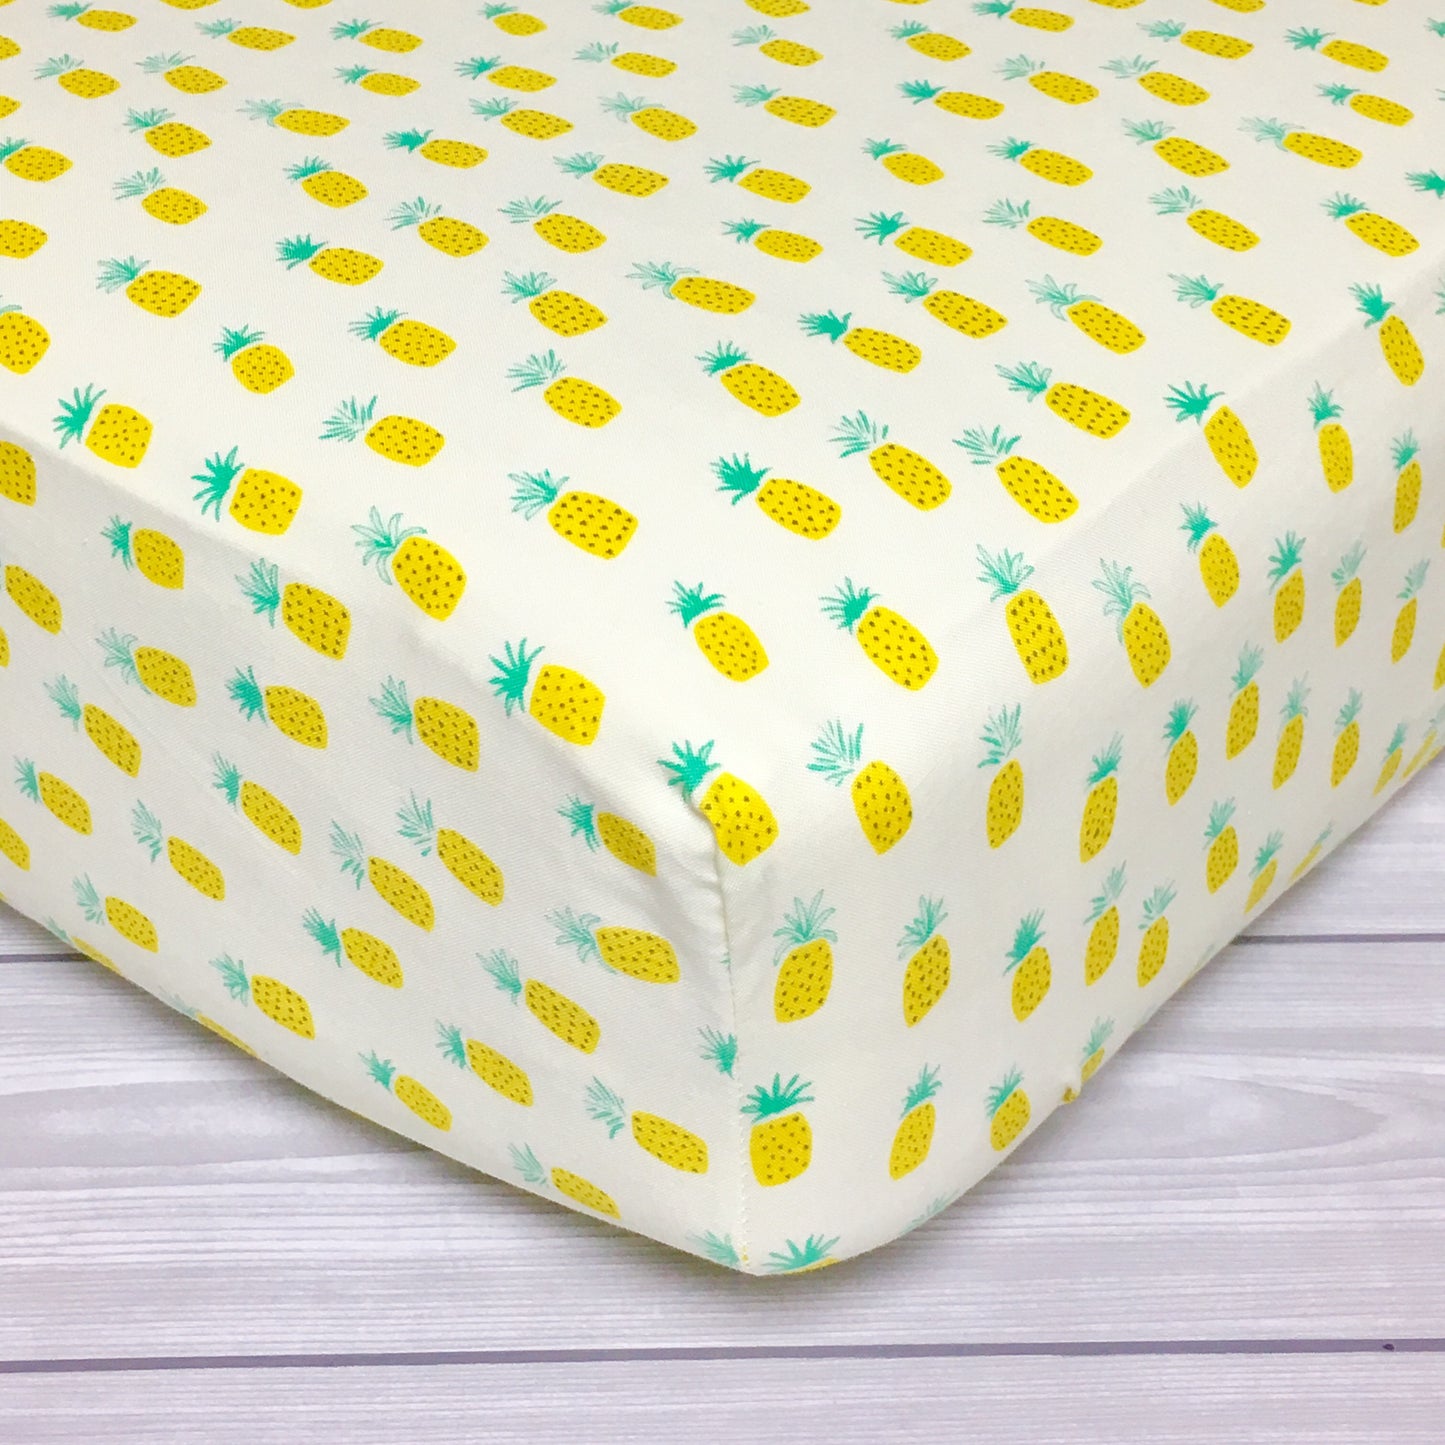 Pineapple Crib Sheet or Changing Pad Cover